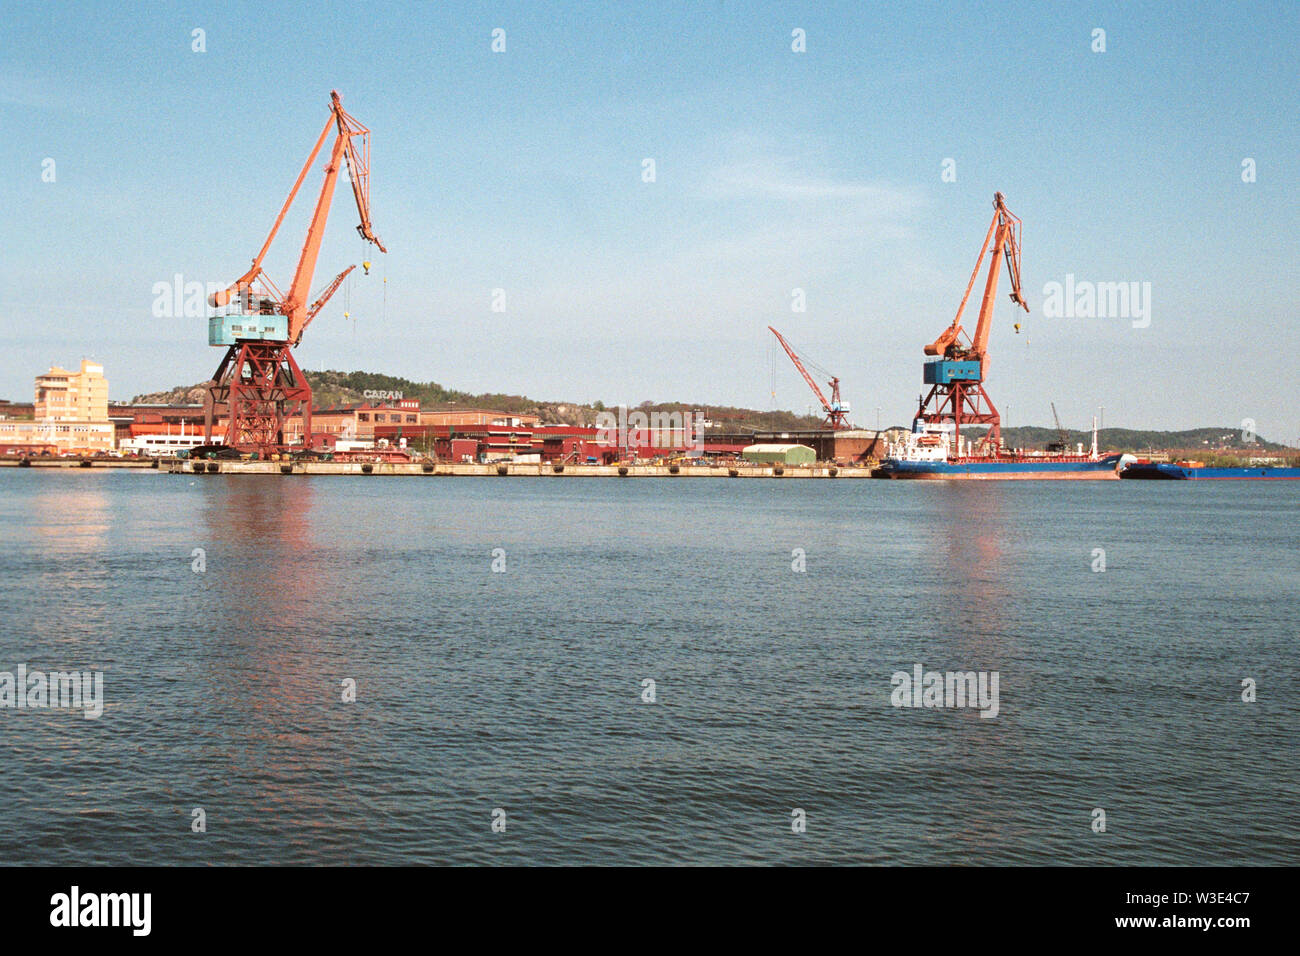 Gothenburg Harbor Sweden the busiest shipping port in the Nordic countries. Stock Photo